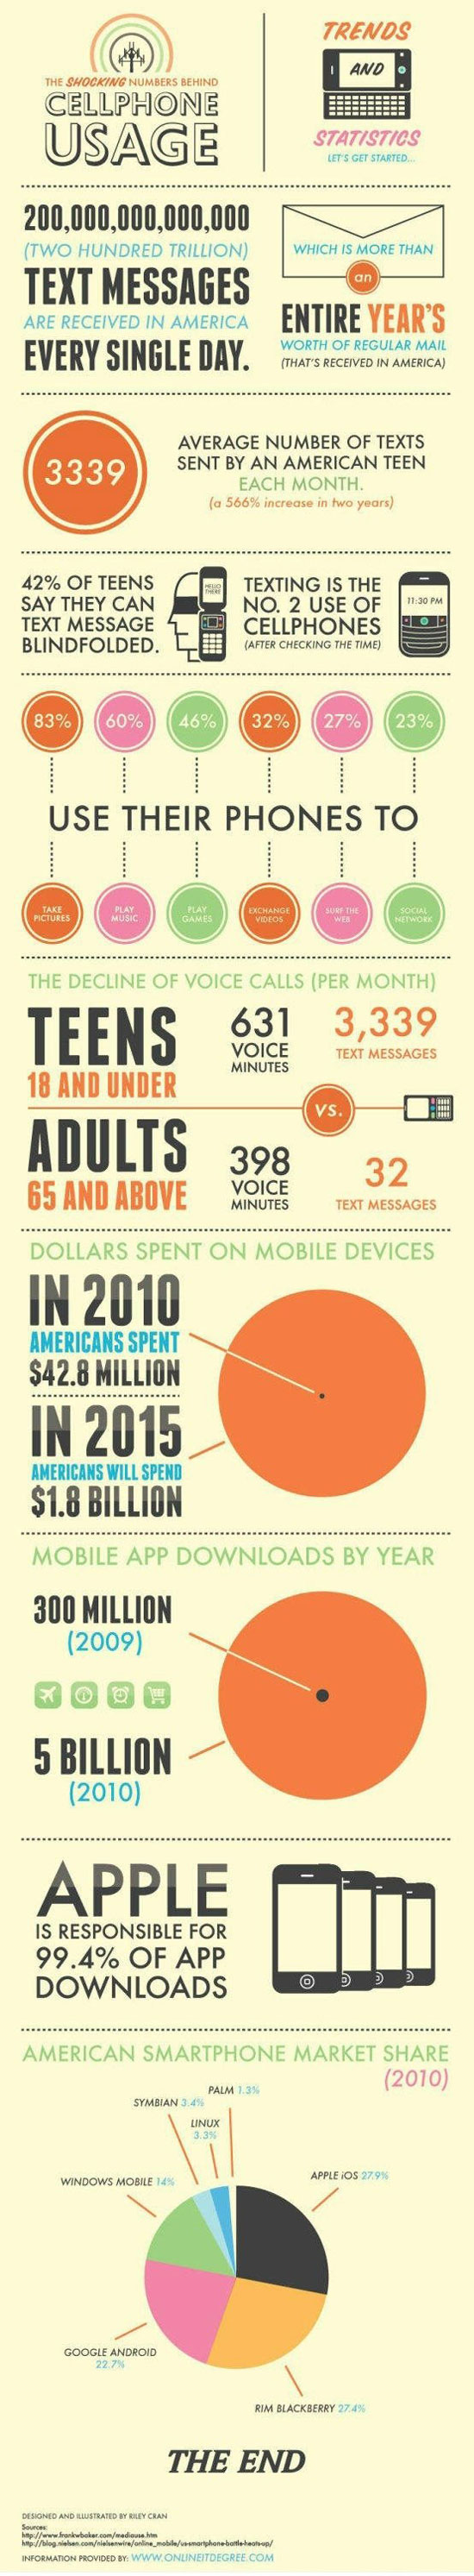 some stats behind cellphone usage